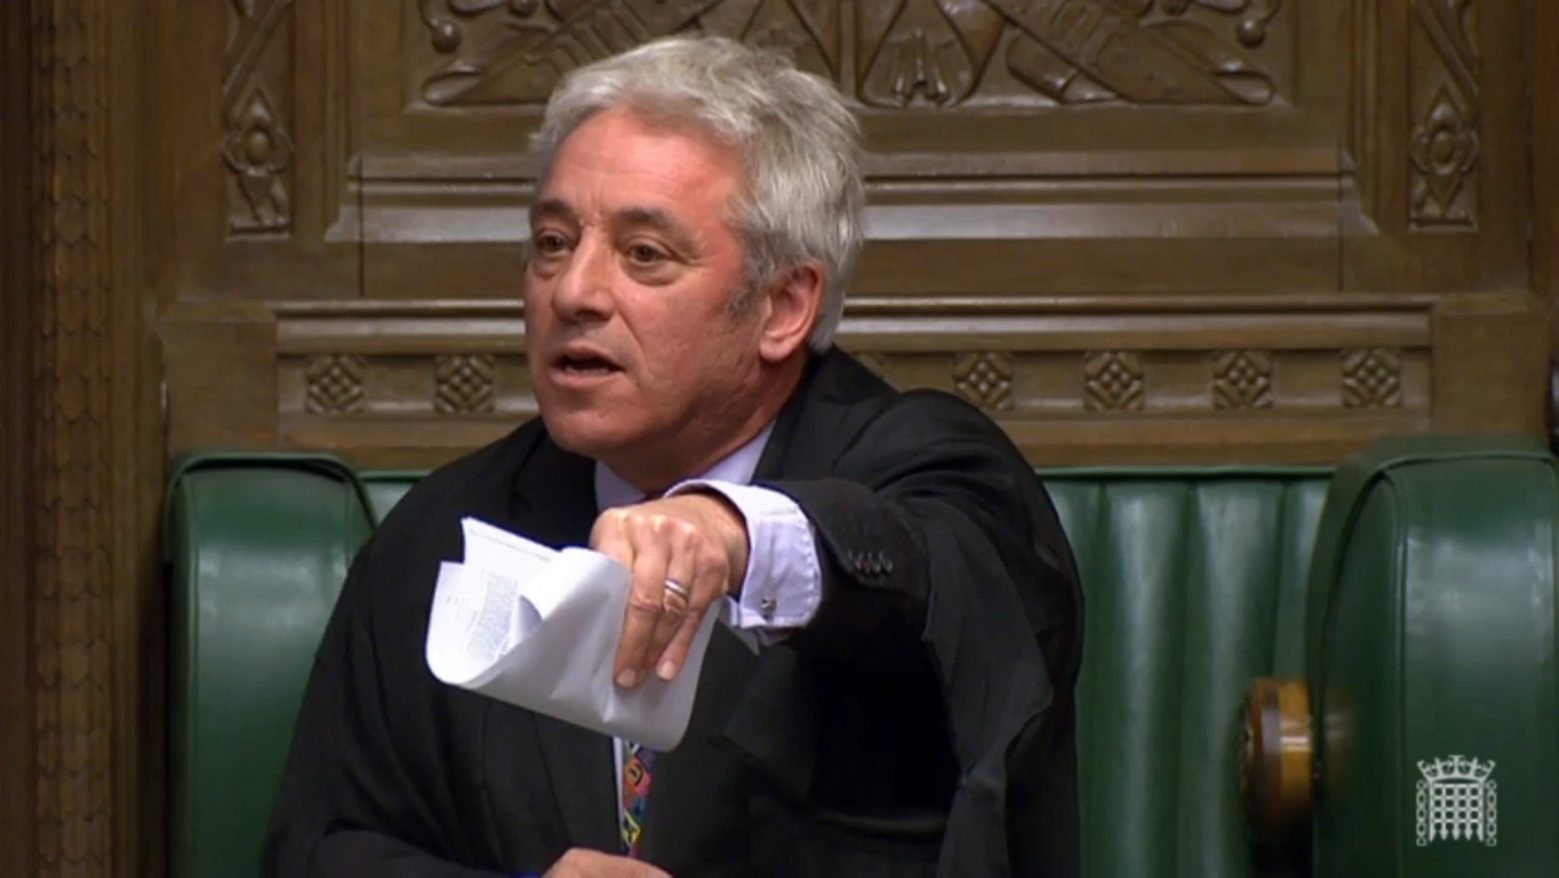 epa07938684 A grab from a handout video made available by the UK Parliamentary Recording Unit shows a Speaker of the House of Commons John Bercow respond to MPs on his decision on a meaningful vote at the House of Commons in London, Britain, 21 October 2019. The Speaker of the House of Commons is to announce his decision to reject a meaningful vote on the Prime Minister's new Brexit deal.  EPA/UK PARLIAMENTARY RECORDING UNIT HANDOUT MANDATORY CREDIT: UK PARLIAMENTARY RECORDING UNIT HANDOUT EDITORIAL USE ONLY/NO SALES BRITAIN PARLIAMENT EU BREXIT